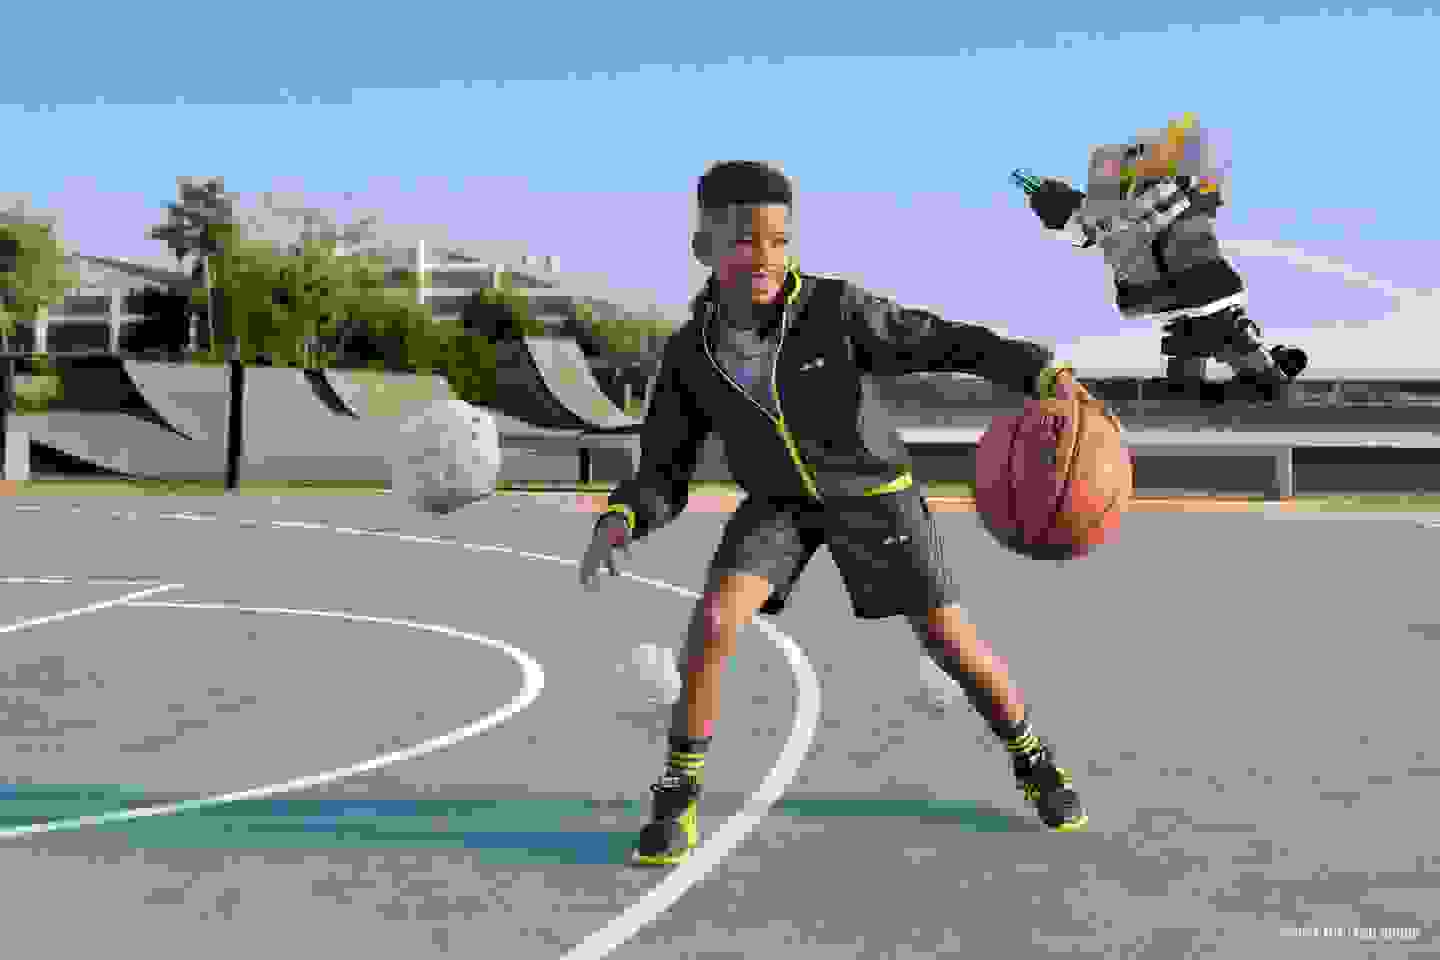 Smiling boy dribbling basketball around asteroids and a flying robot